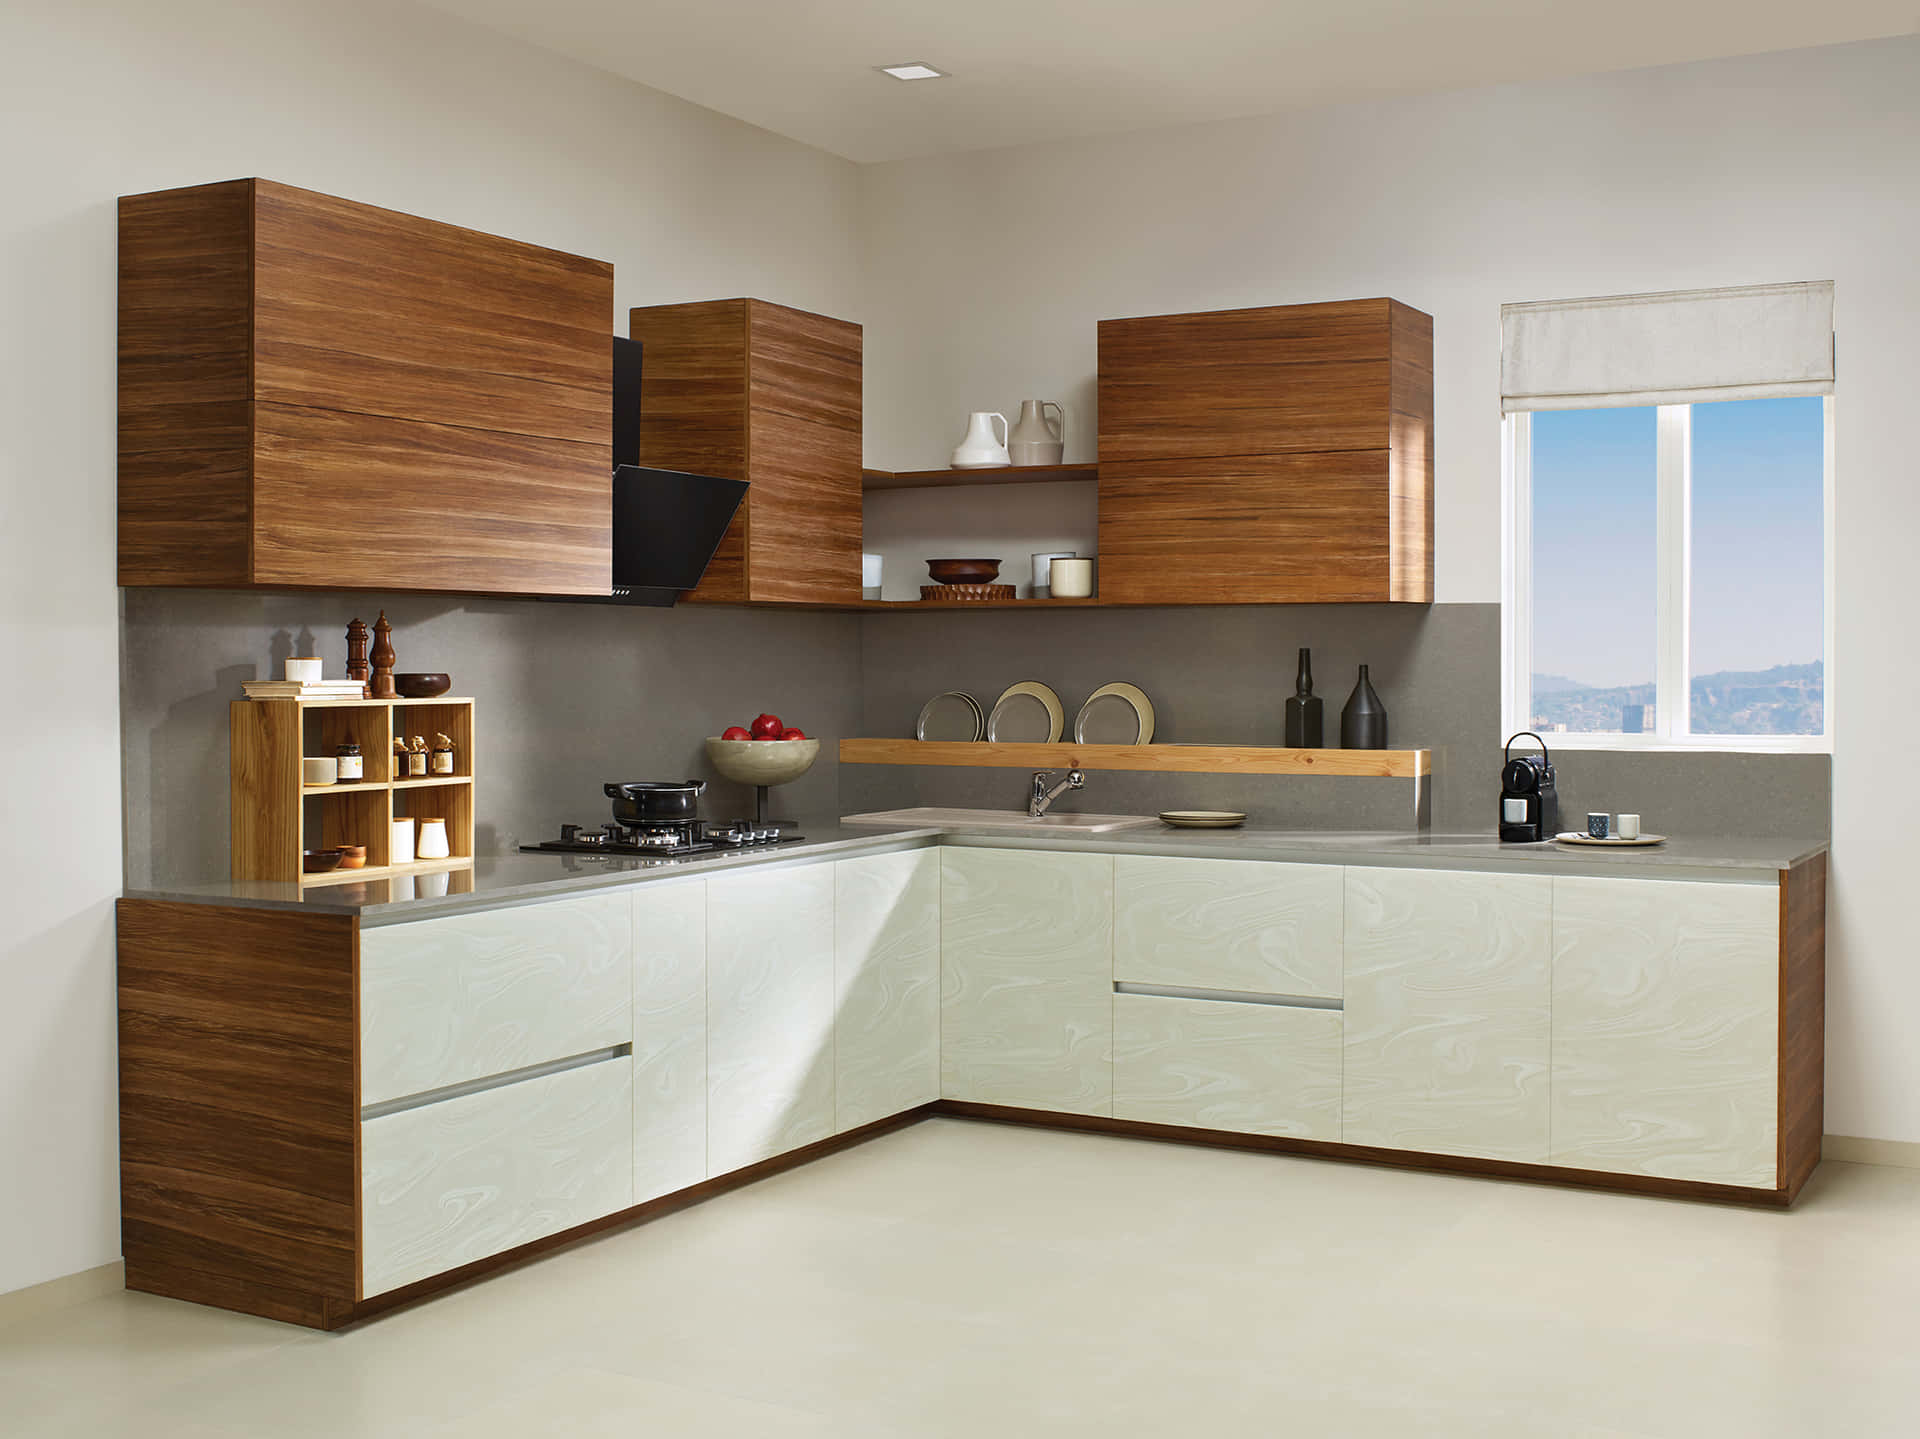 Modular Kitchen With Wooden Cabinets Picture